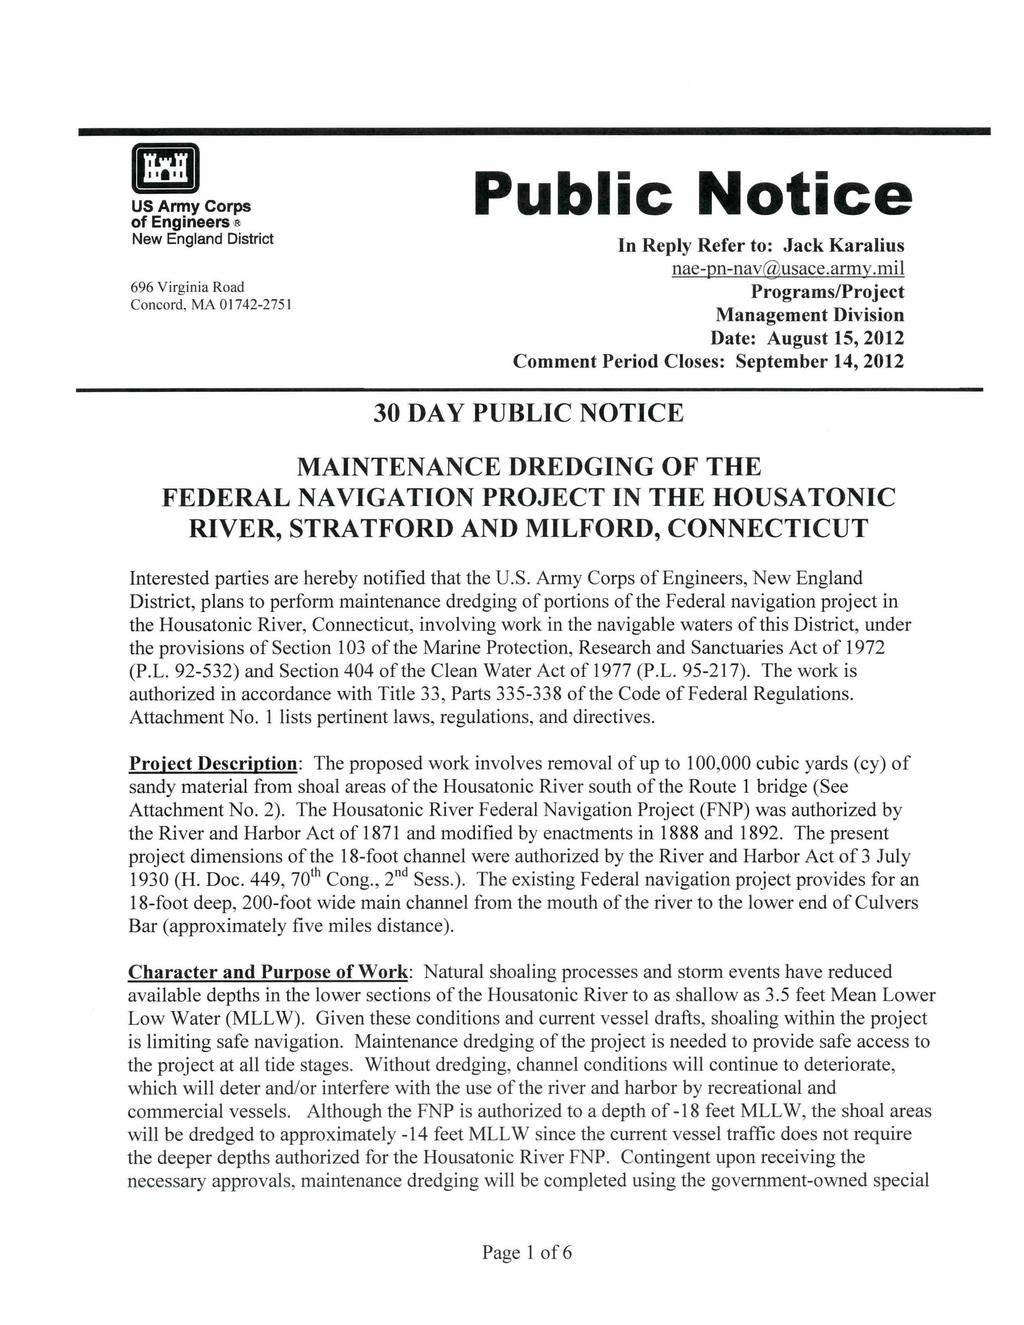 I-~ I II I " I US Army Corps of Engineers New England District 66 Virginia Road Concord, MA 01742-2751 Public Notice In Reply Refer to: Jack Karalius nae-pn-nav@usace.army.